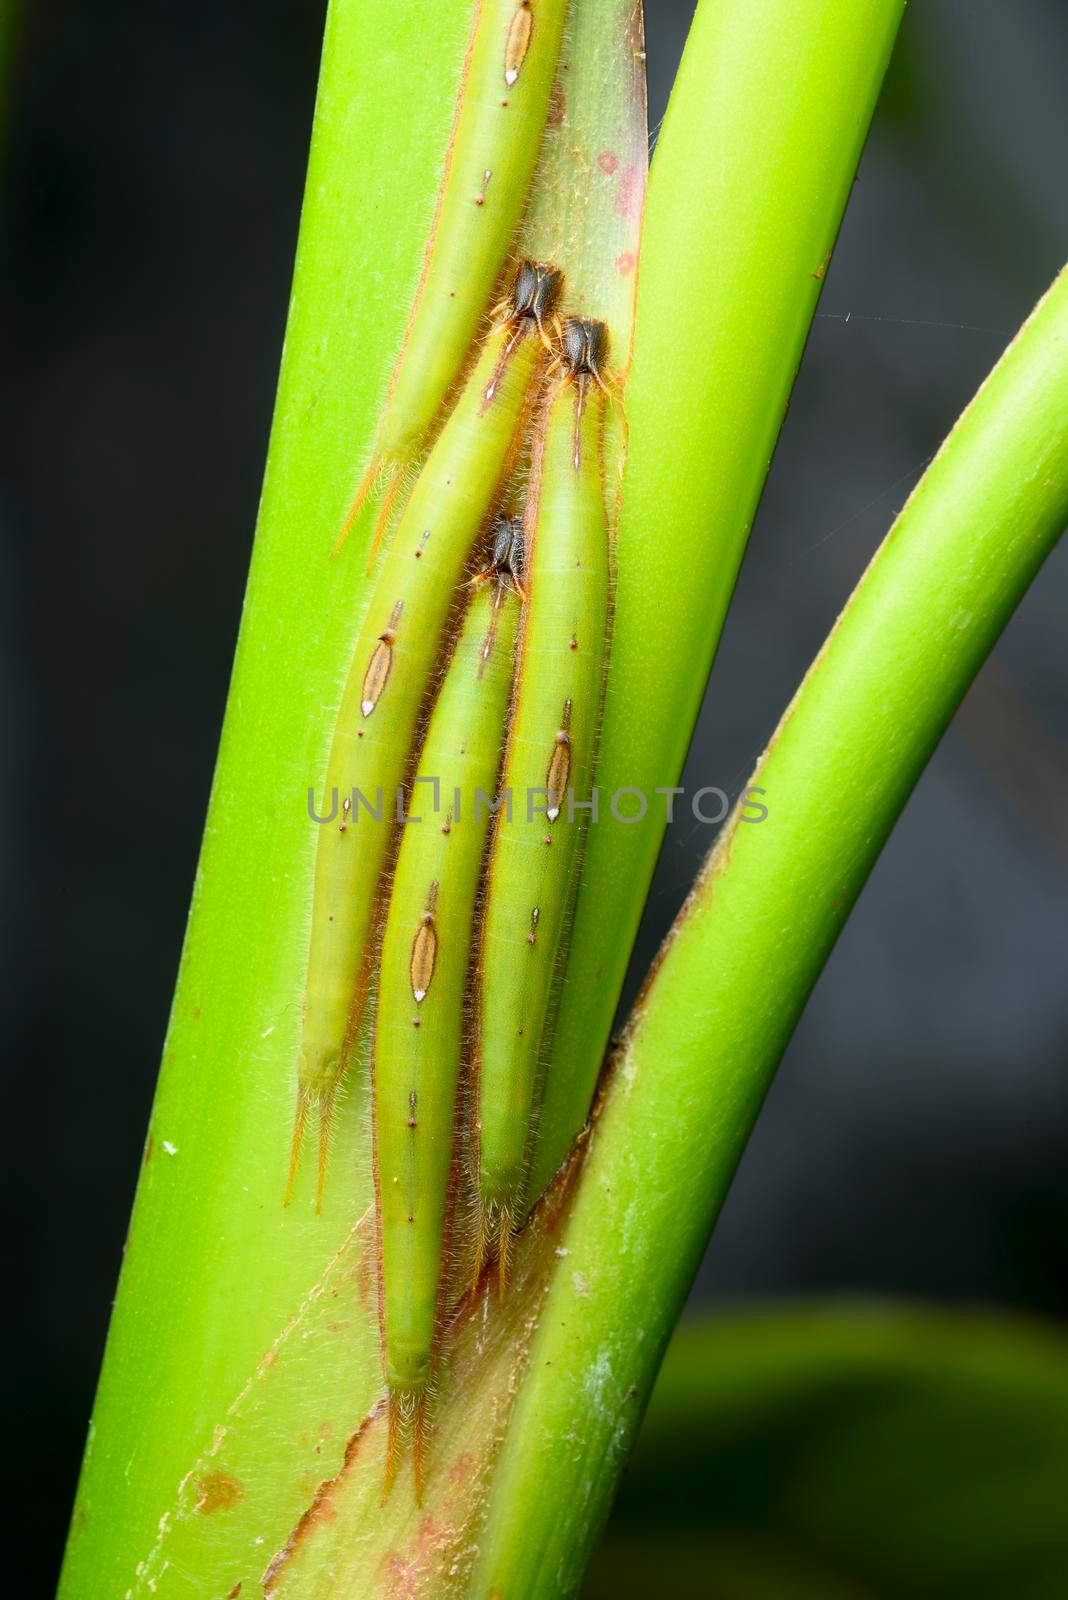 Tropical caterpillars hiding along the center of a banana plant leaf to camouflage